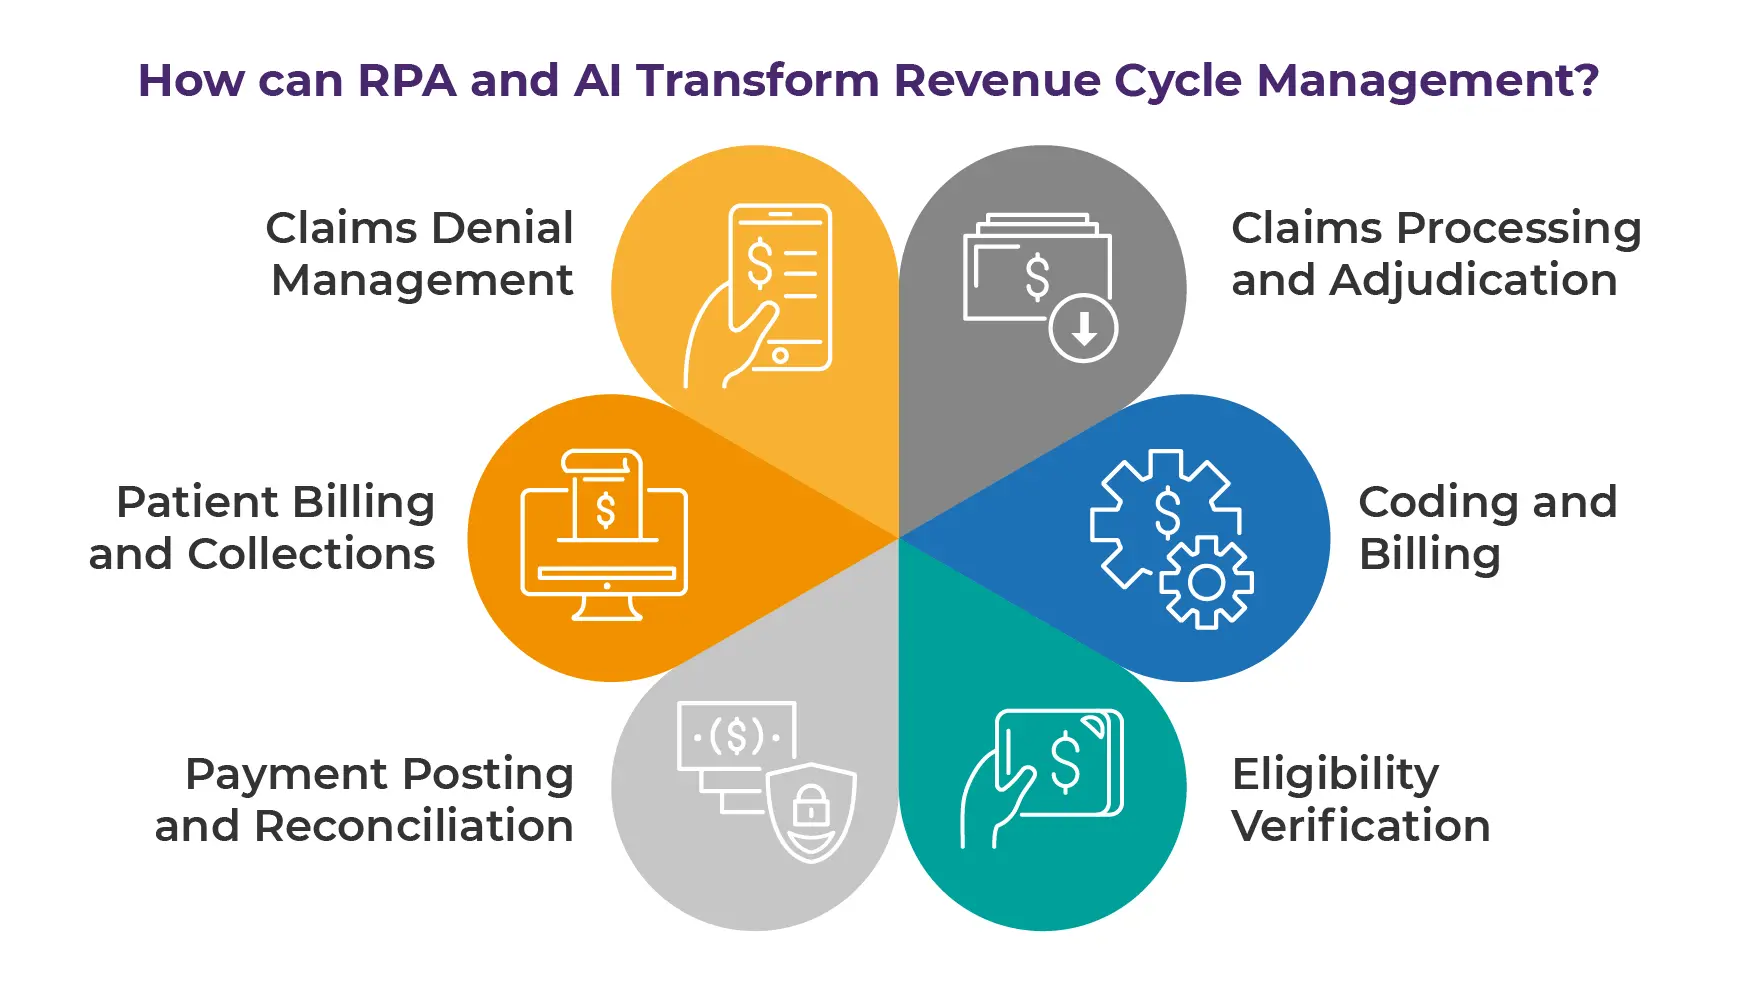 How can RPA and AI Transform Revenue Cycle Management?